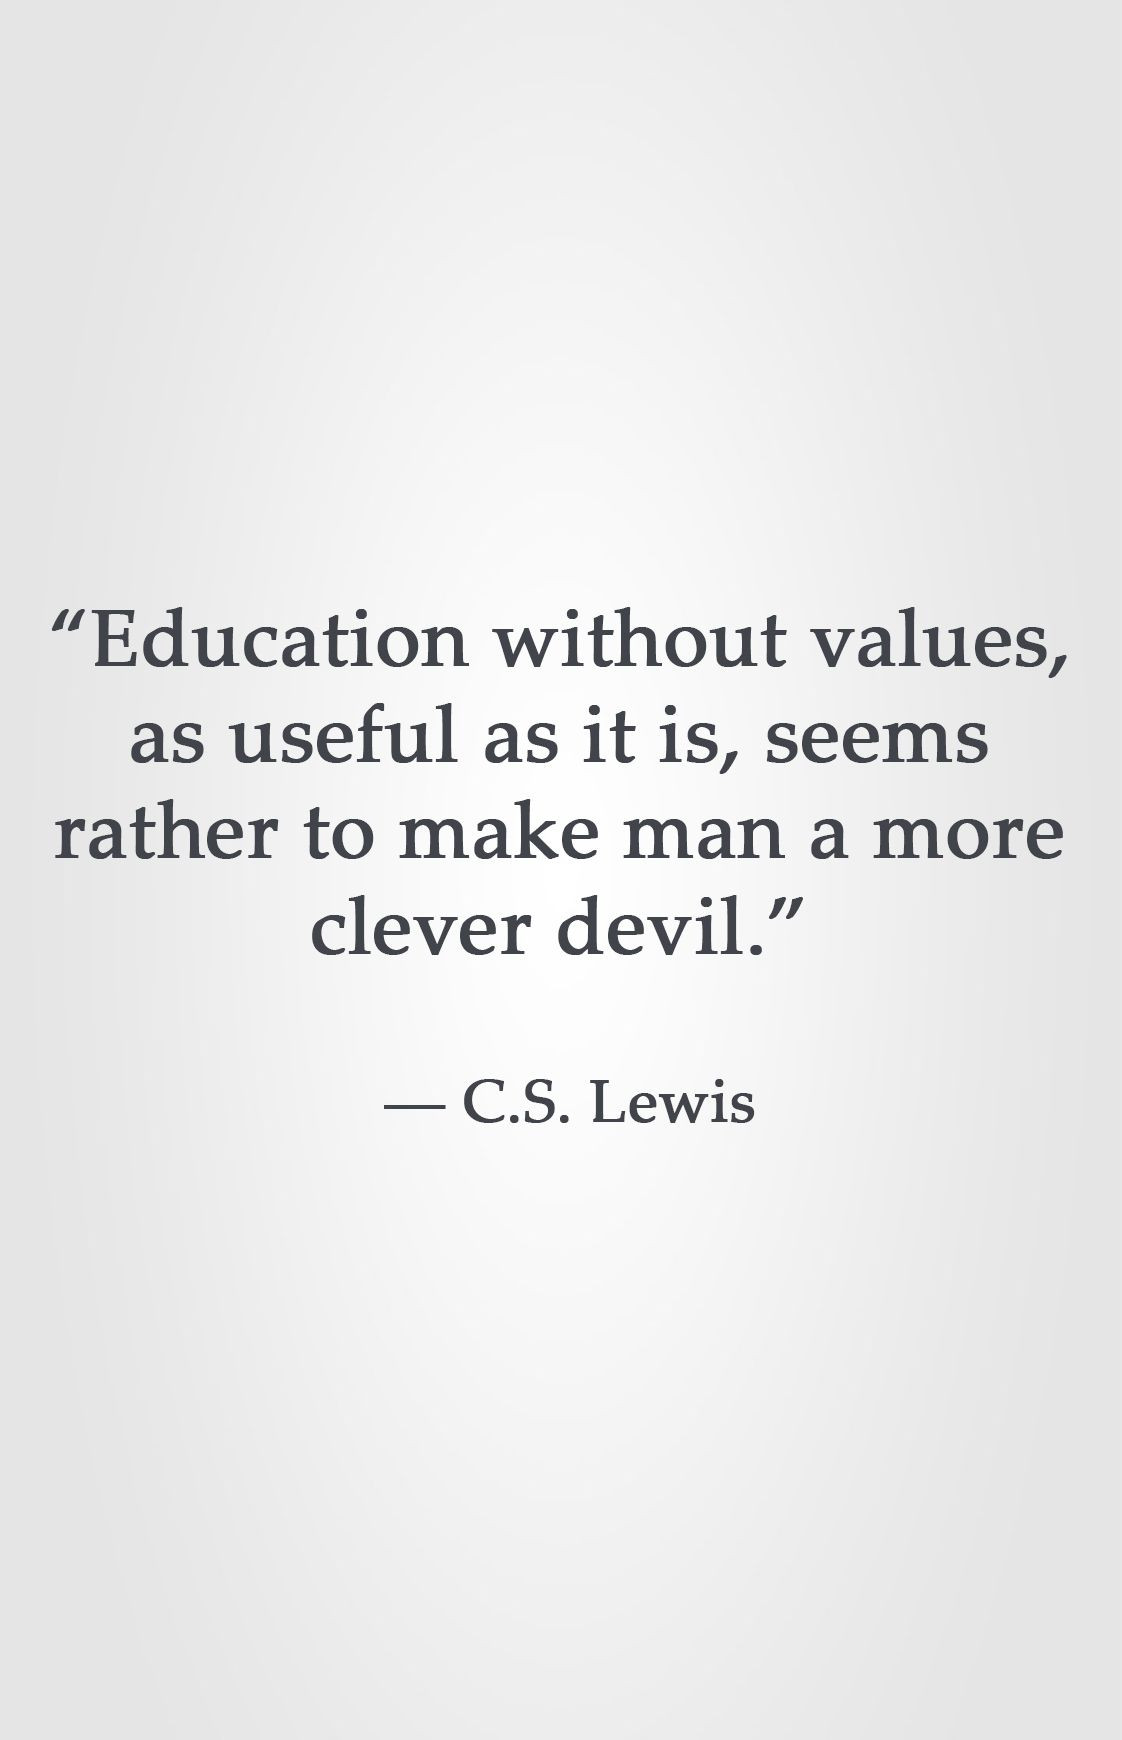 Bible Quotes About Education
 “Education without values as useful as it is seems